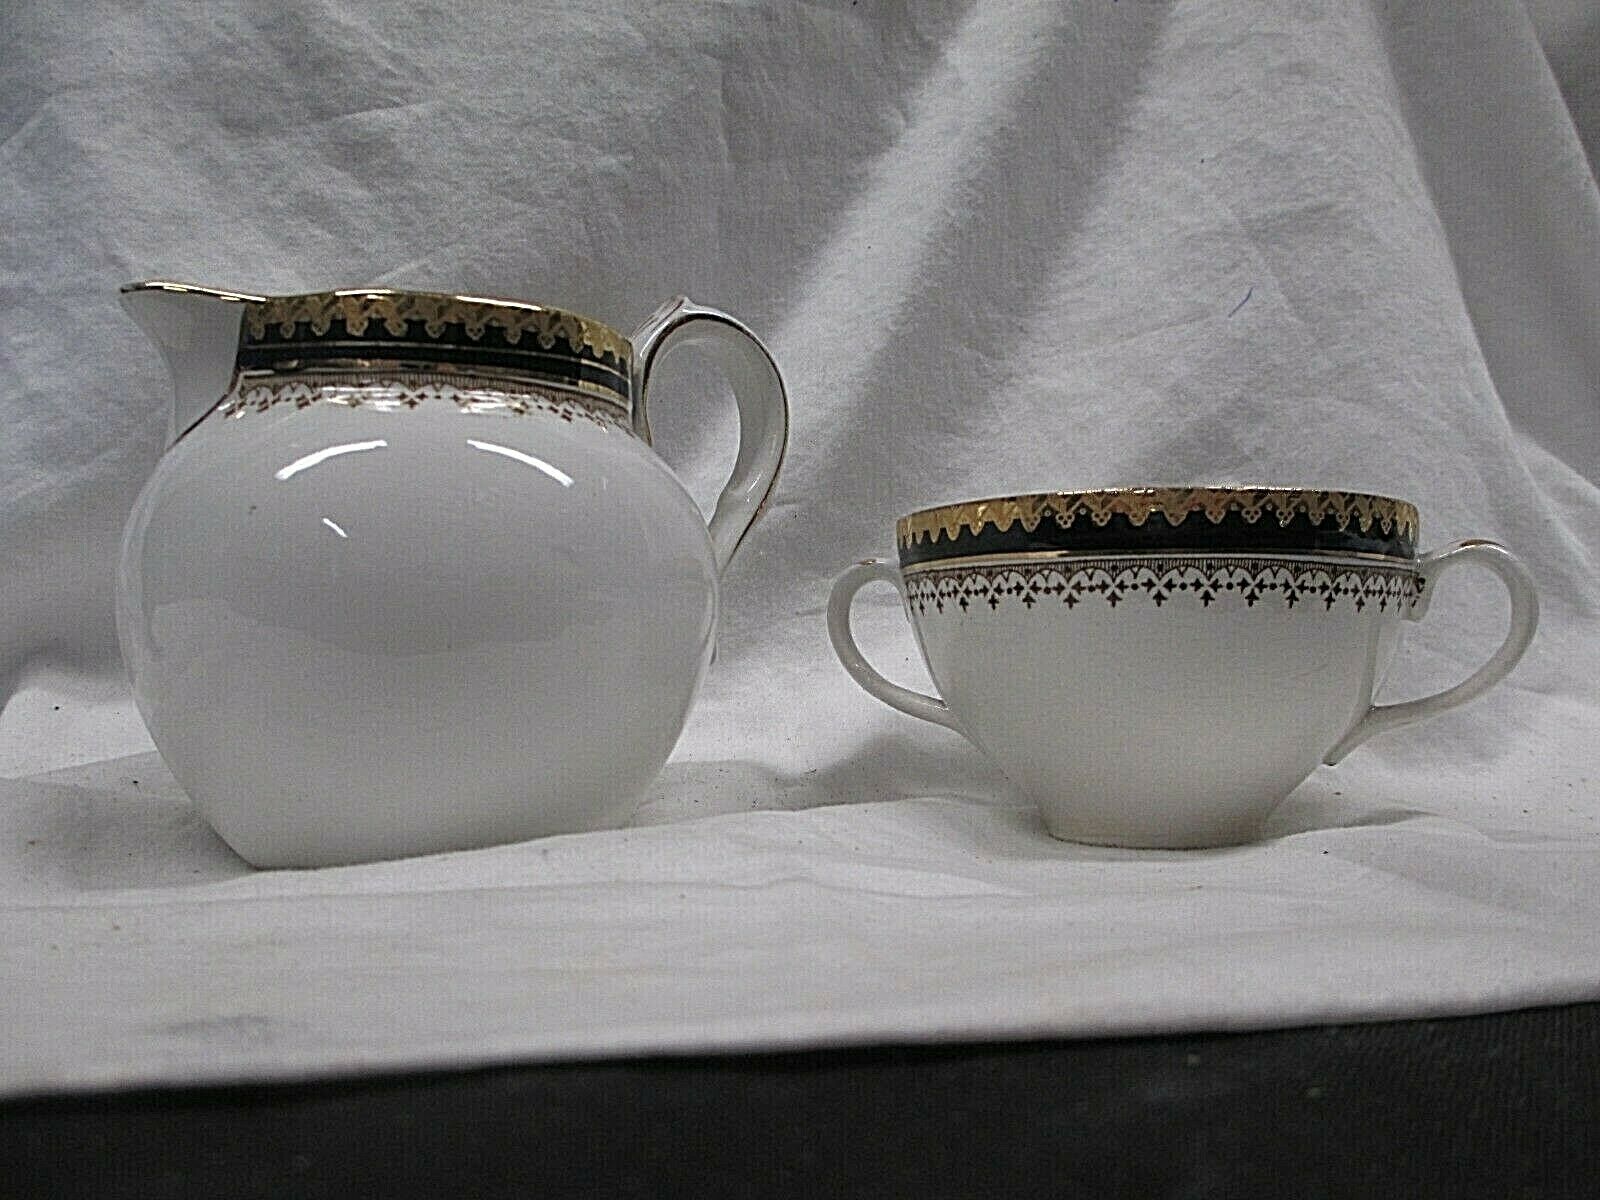 Booths Silicon China England “or Repousse” Creamer & Sugar White  Blue/gold Trim